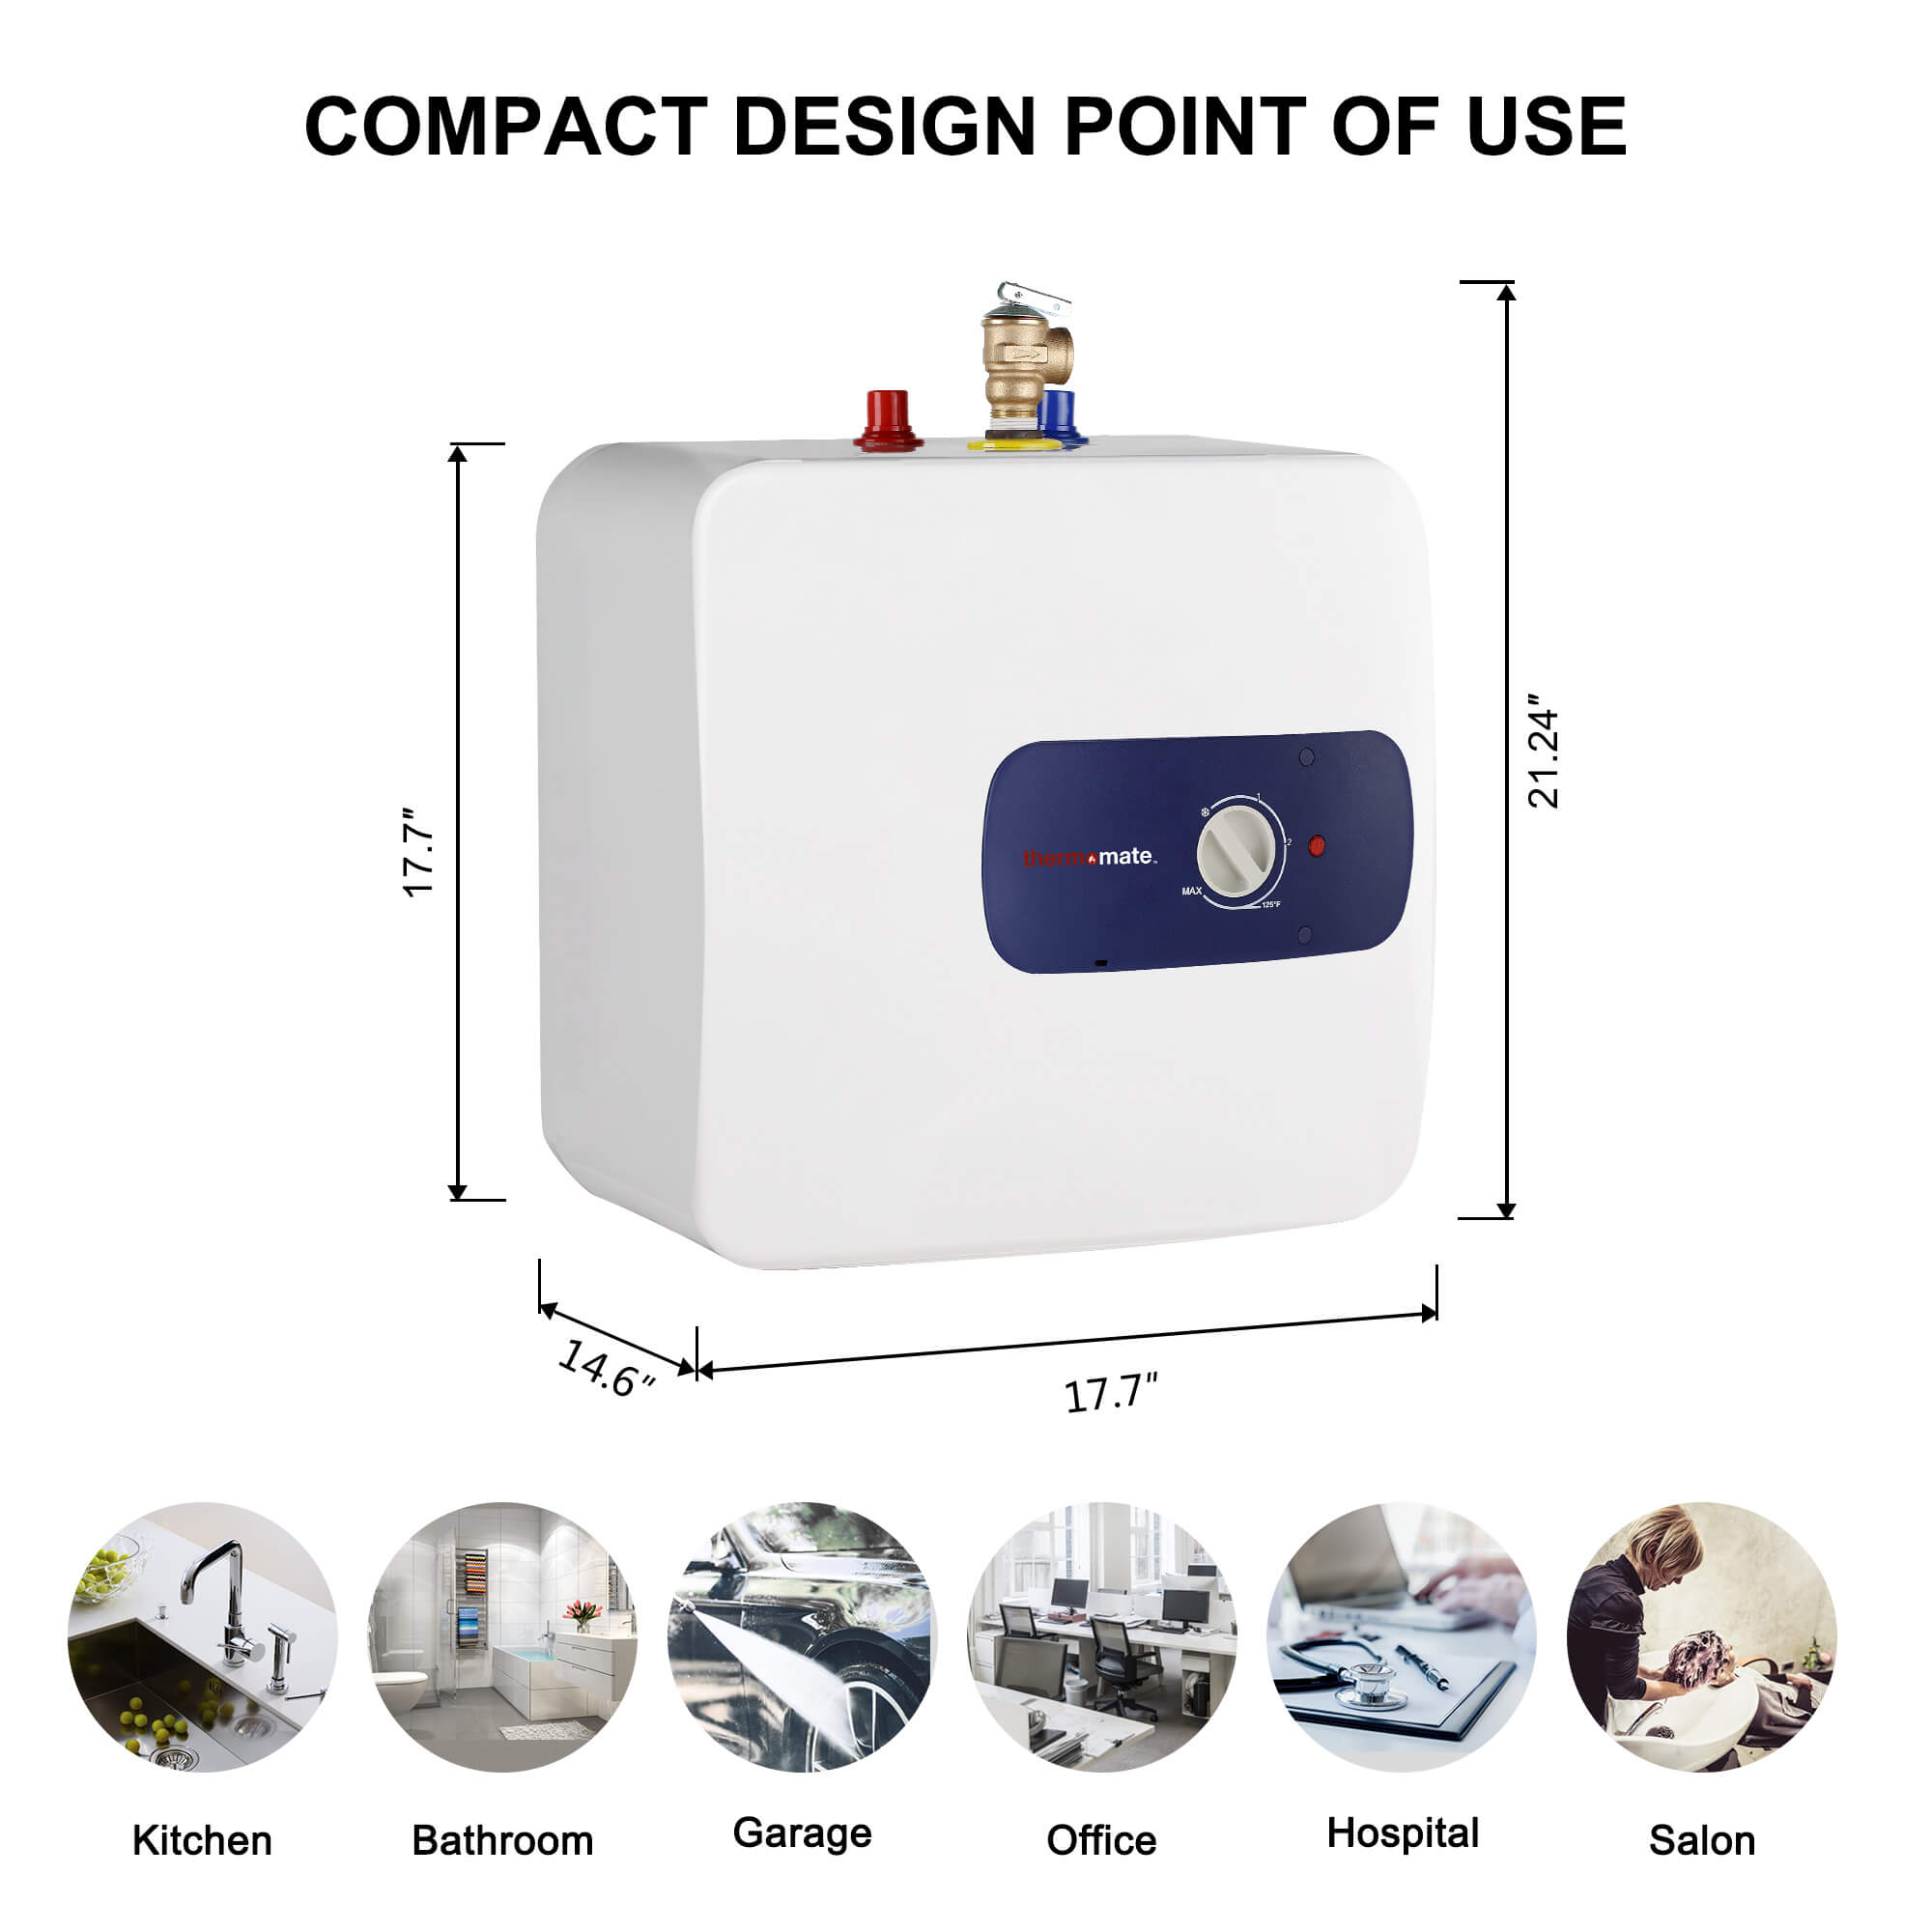 thermomate Electric Mini Tank Water Heater, ES700 6.5 Gallons Point of Use Water Heater for Instant Hot Water Under Kitchen Sink Plugin Cabled 120V 1440W